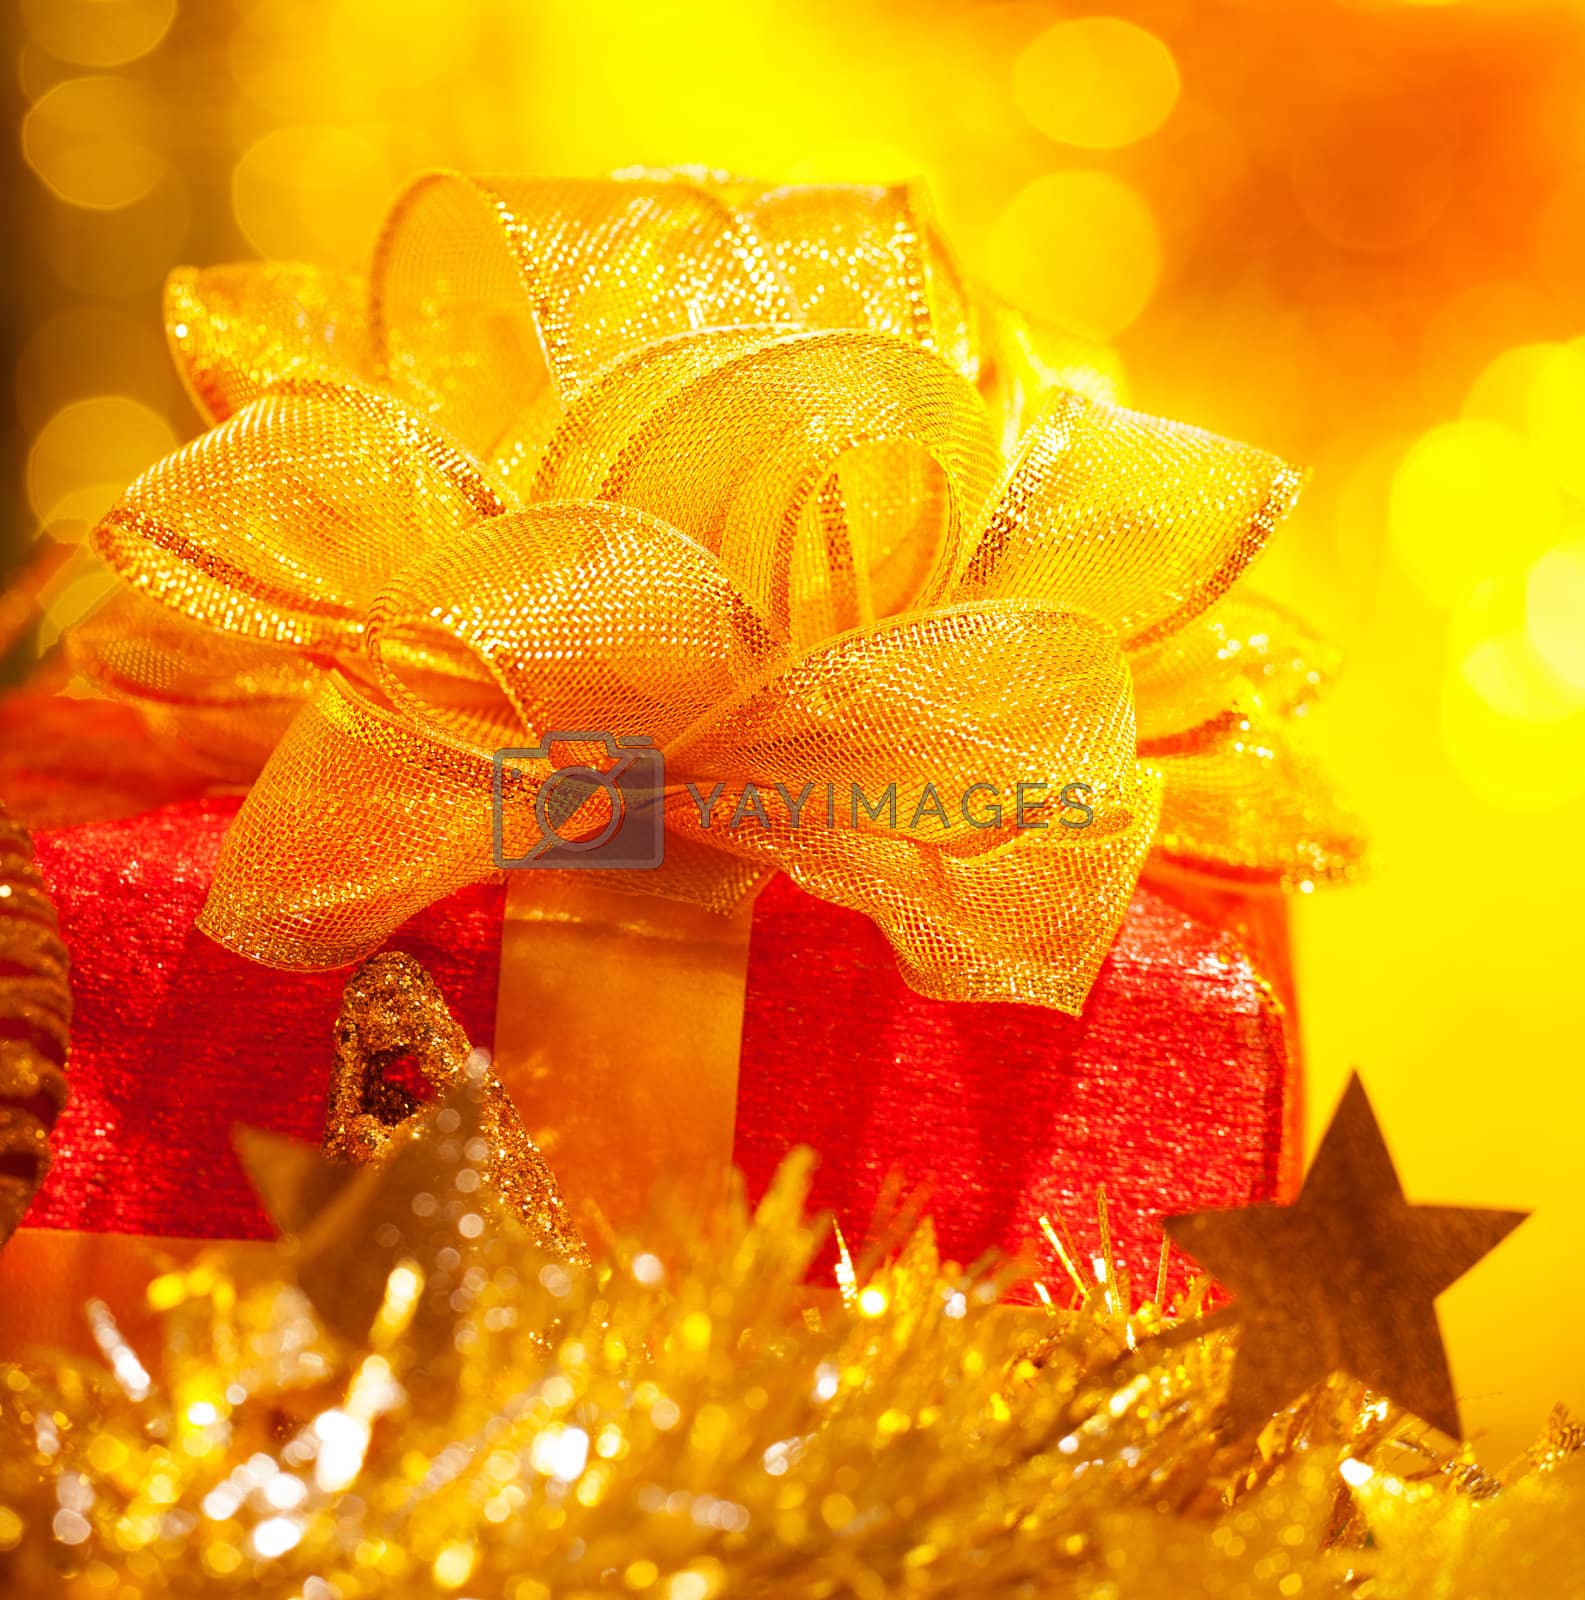 Royalty free image of Christmas present box by Anna_Omelchenko